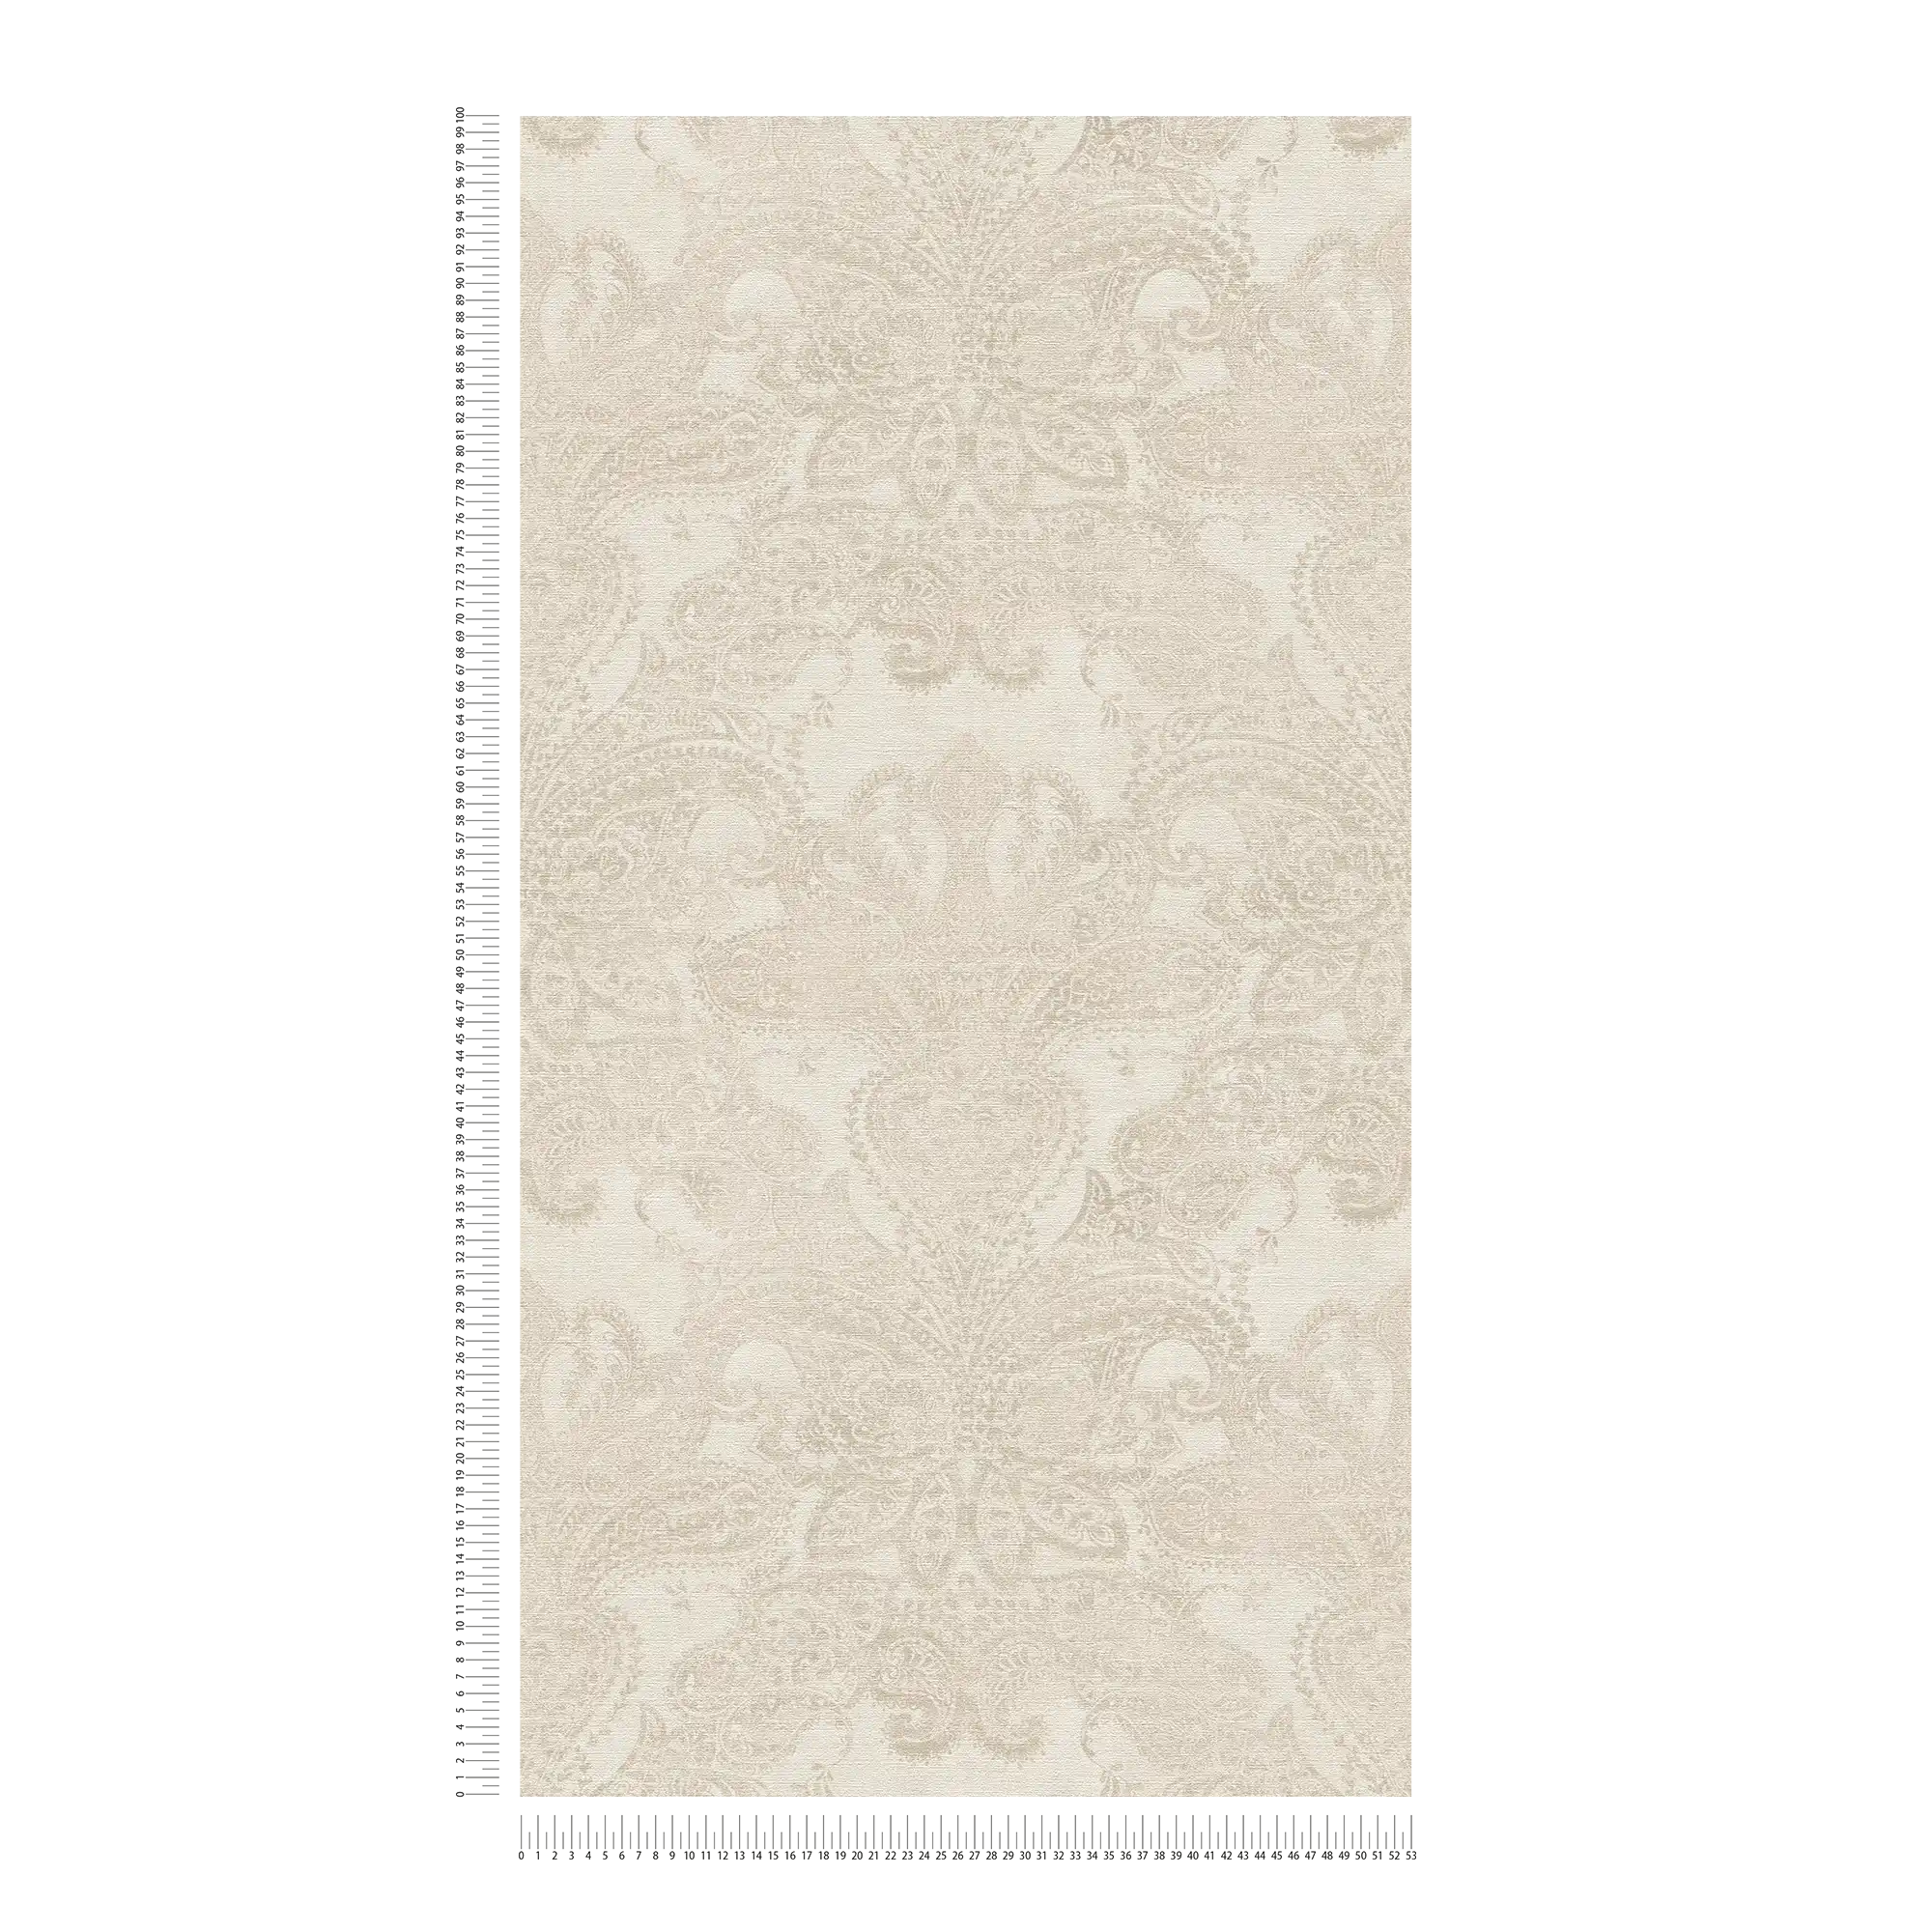             Baroque wallpaper with large ornaments - white, cream, grey
        